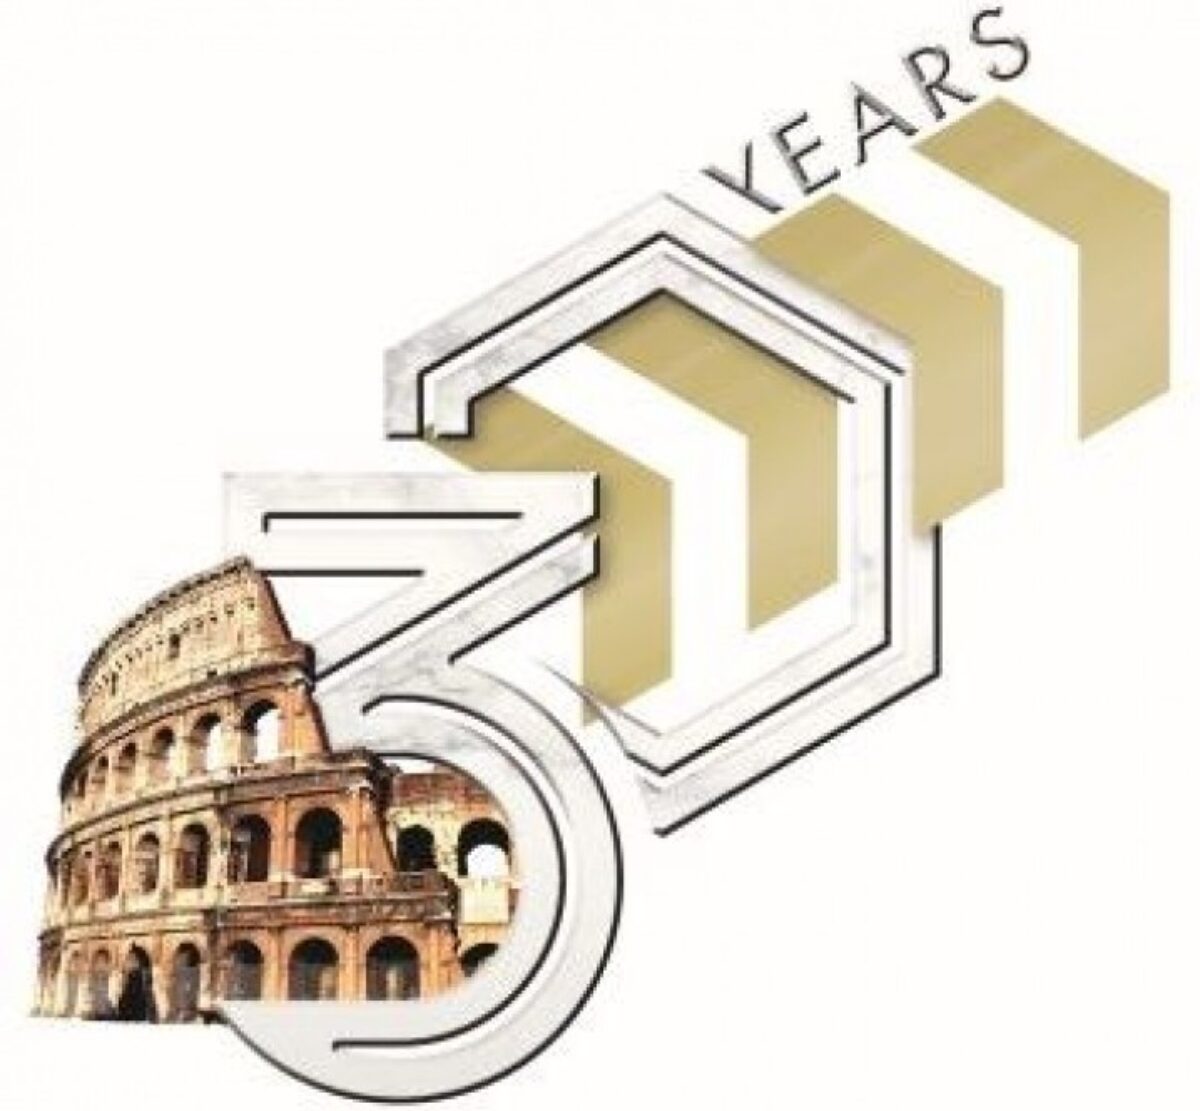 Next Hydraulics Celebrate 30 Years In Business in Rome - Penny Hydraulics Ltd